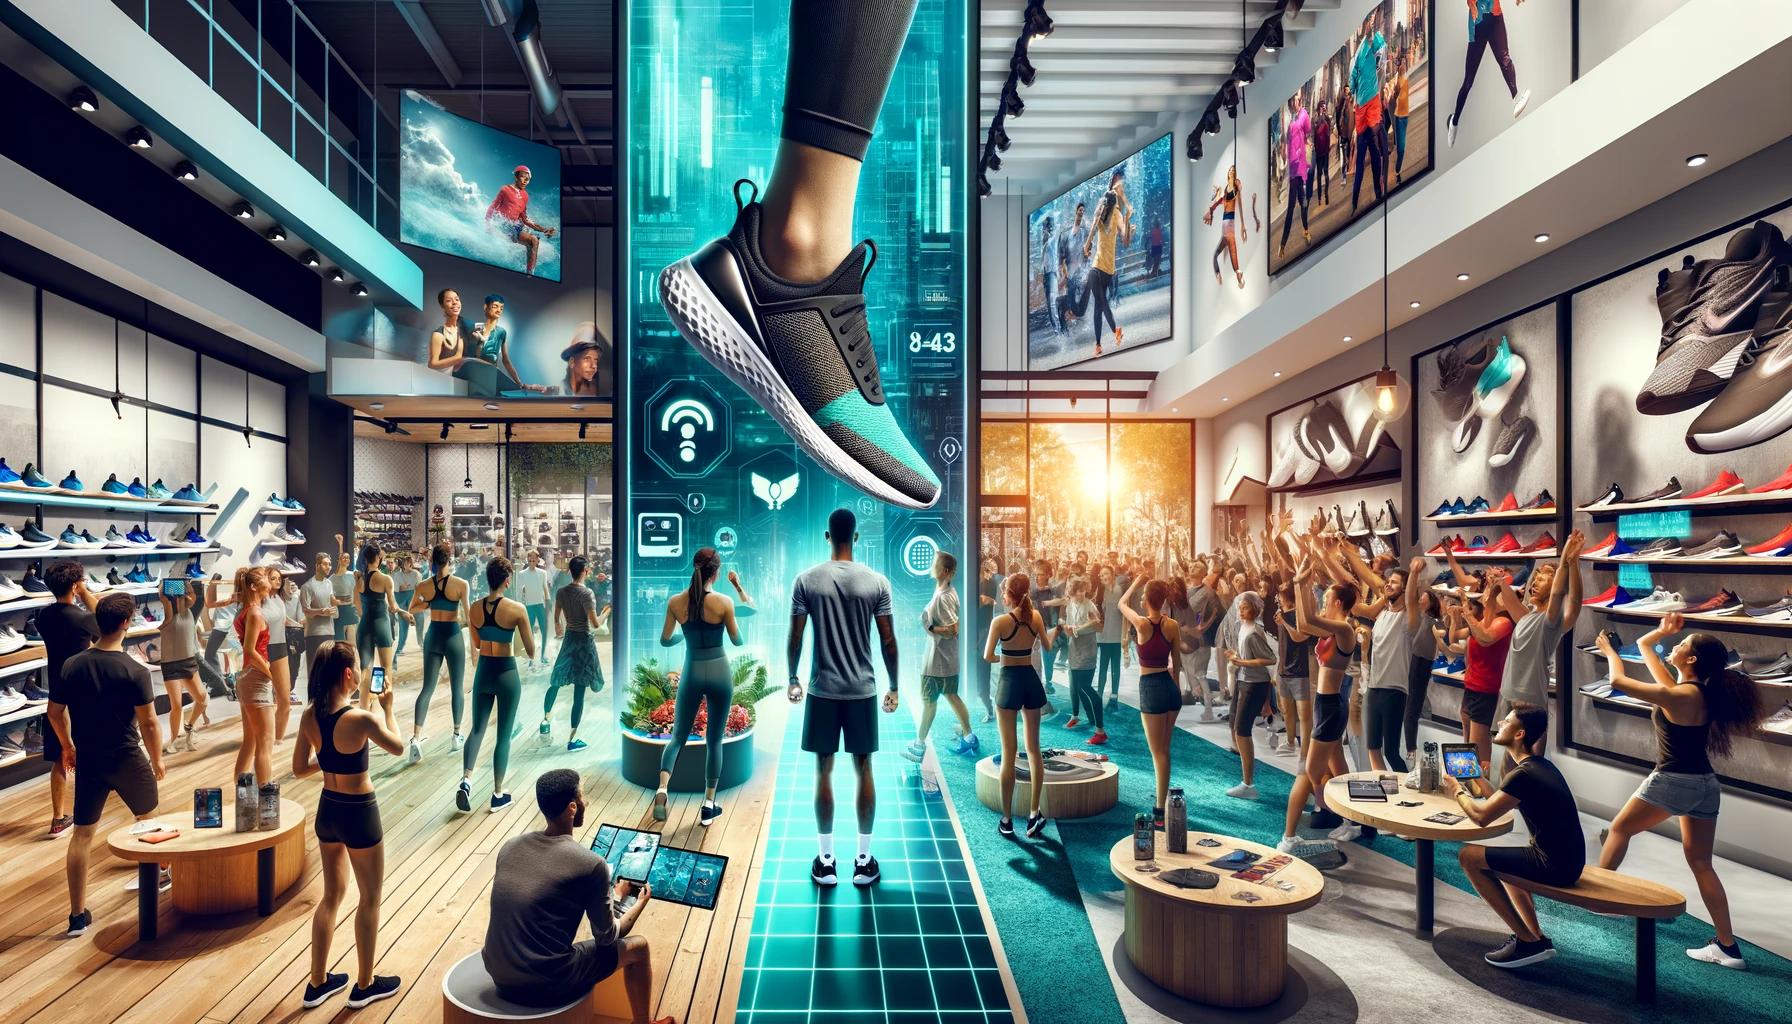 Split image of a sports retail store with AR technology and interactive displays on the left, and a lively community fitness class and product launch event on the right.